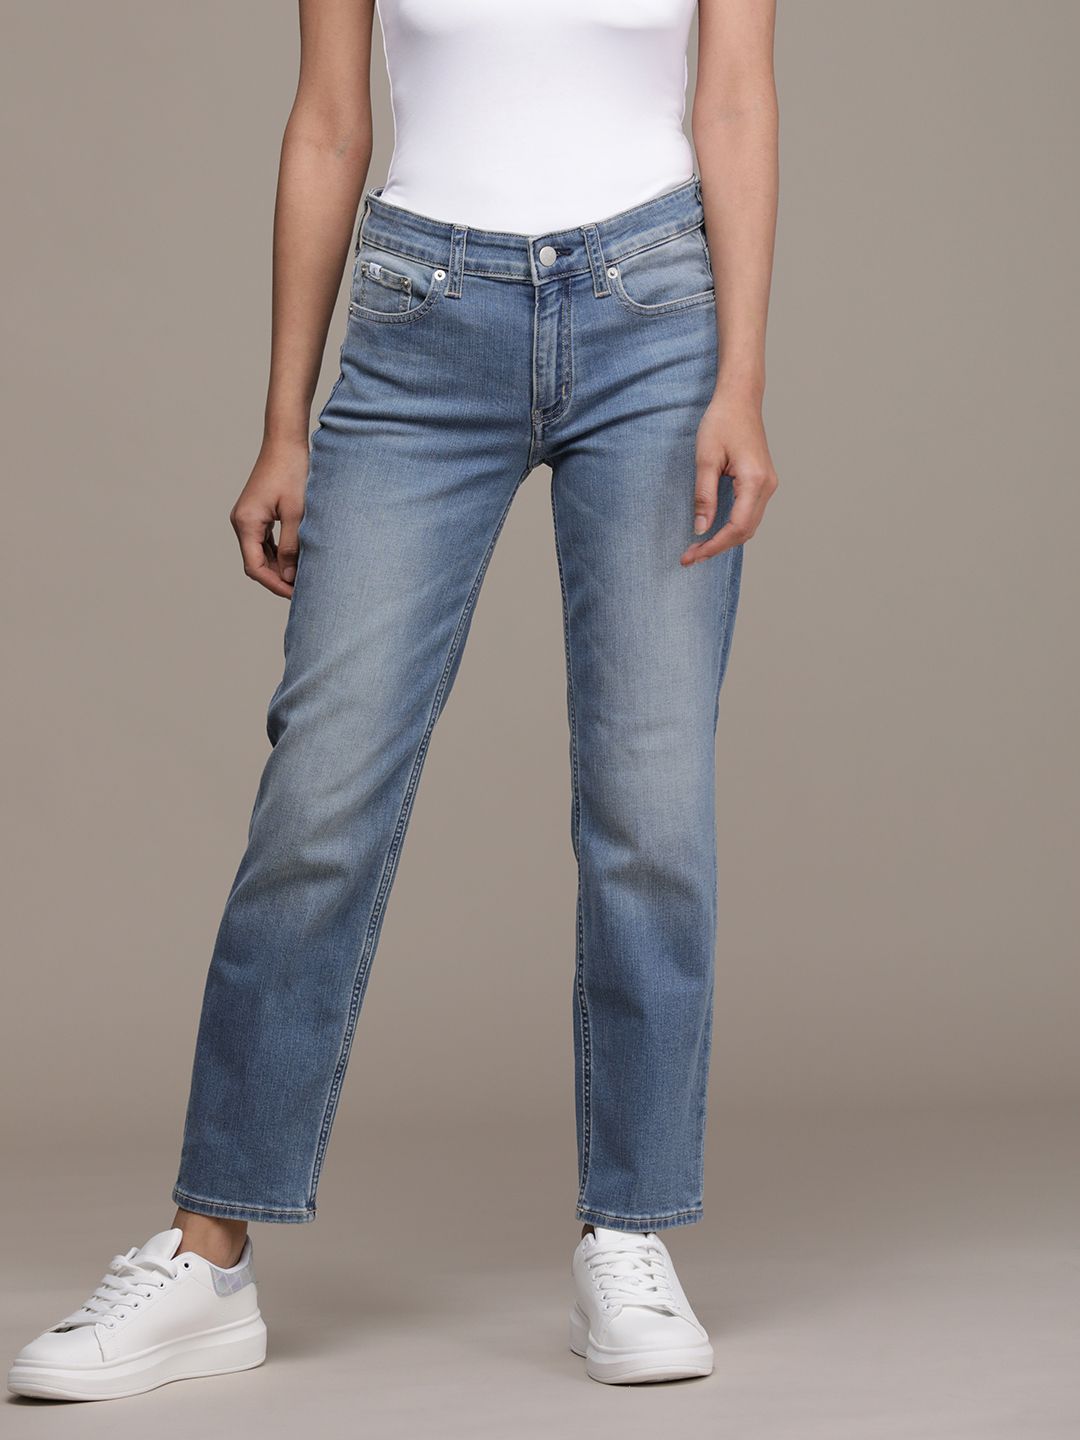 Calvin Klein Jeans Women Blue Straight Fit Light Fade Stretchable Jeans Price in India